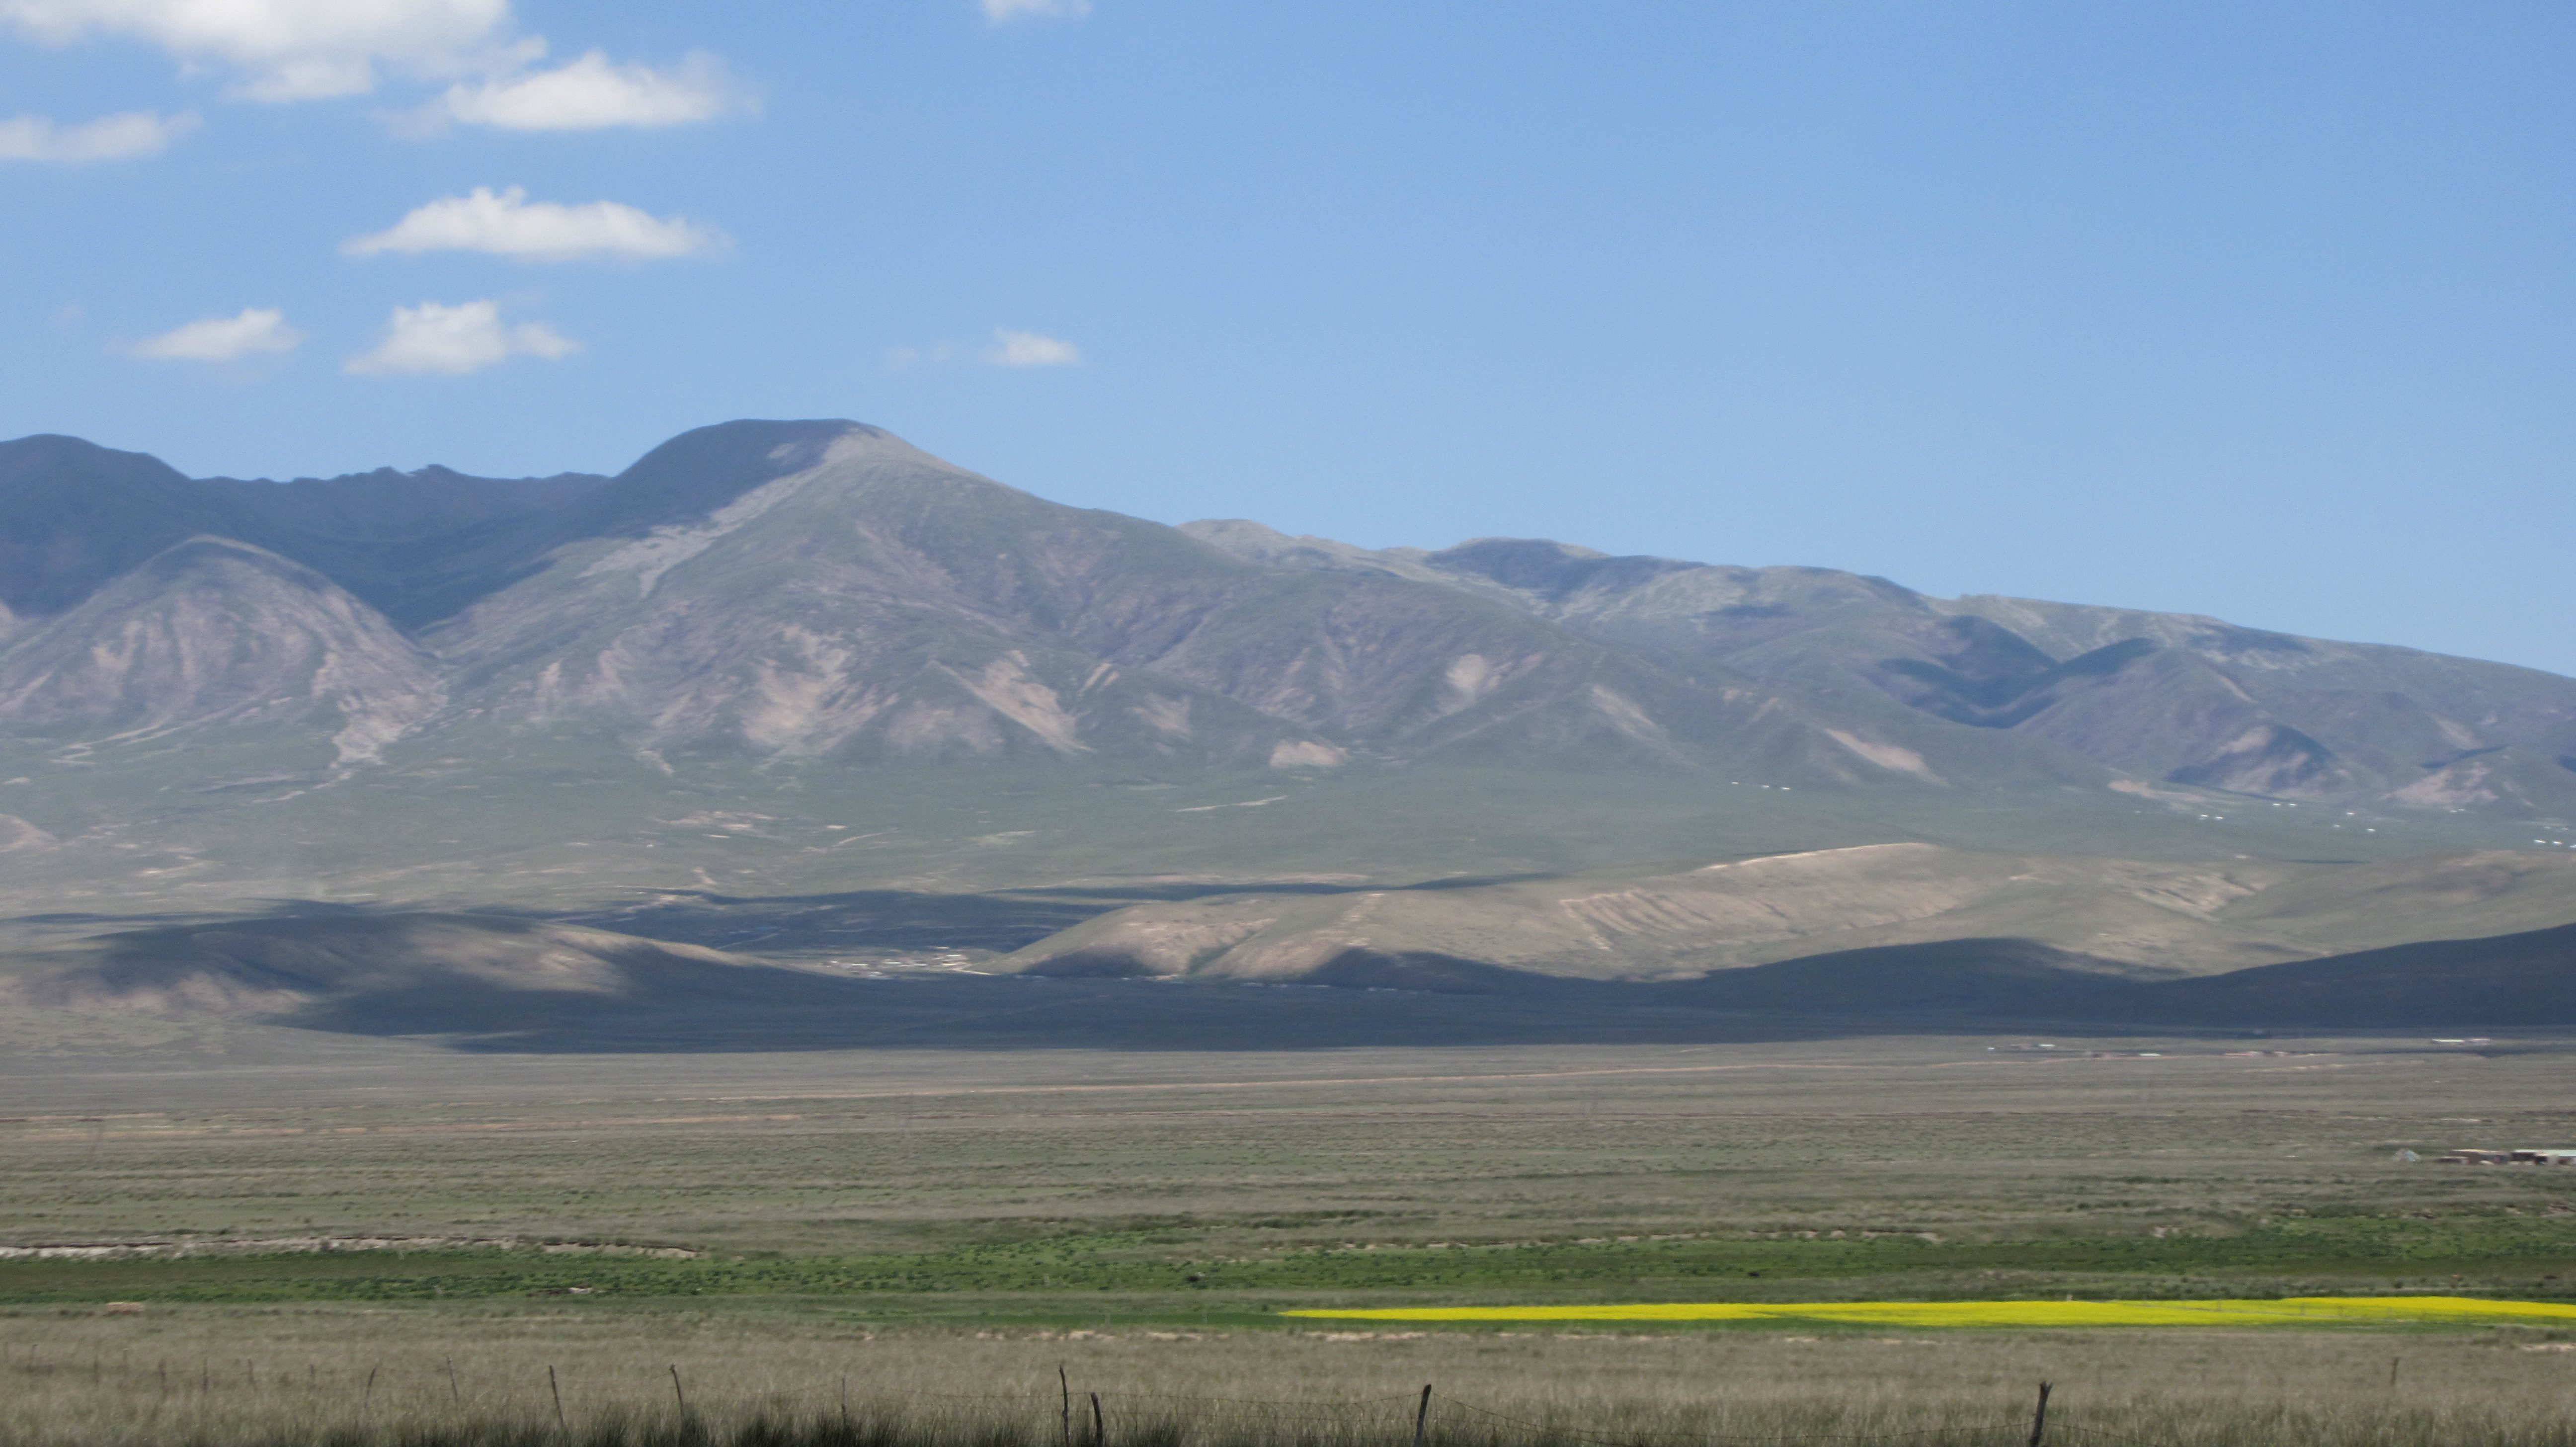 ROAD TRIP. Qinghai Lake has vast grasslands and rolling hills, which make it the perfect destination for those who want to go on a long road trip through the province. 